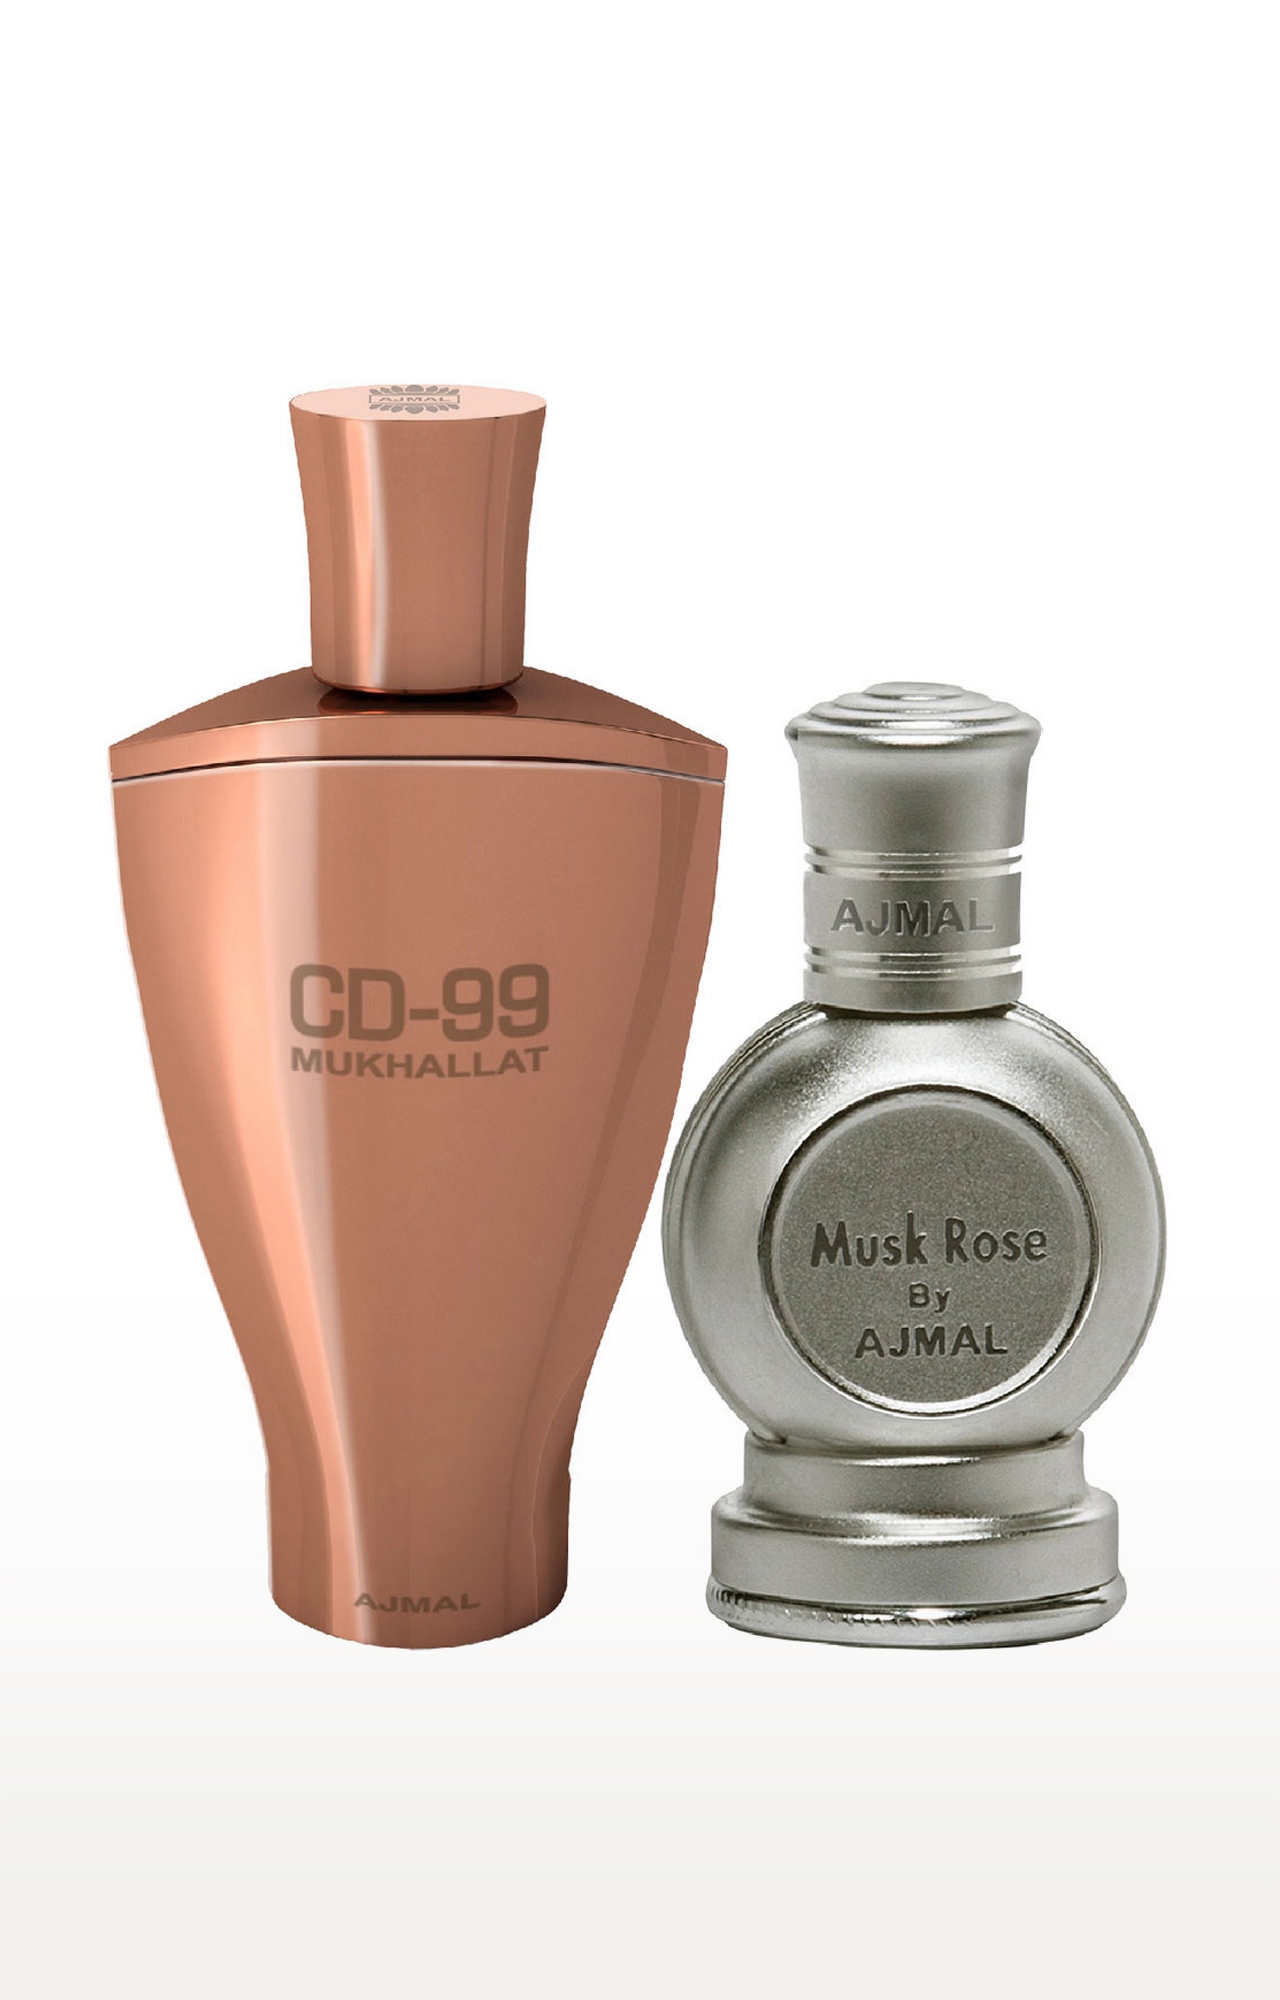 Ajmal | Ajmal CD 99 Mukhallat Concentrated Perfume Attar 14ml for Unisex and Musk Rose Concentrated Perfume Attar 12ml for Unisex + 2 Parfum Testers FREE